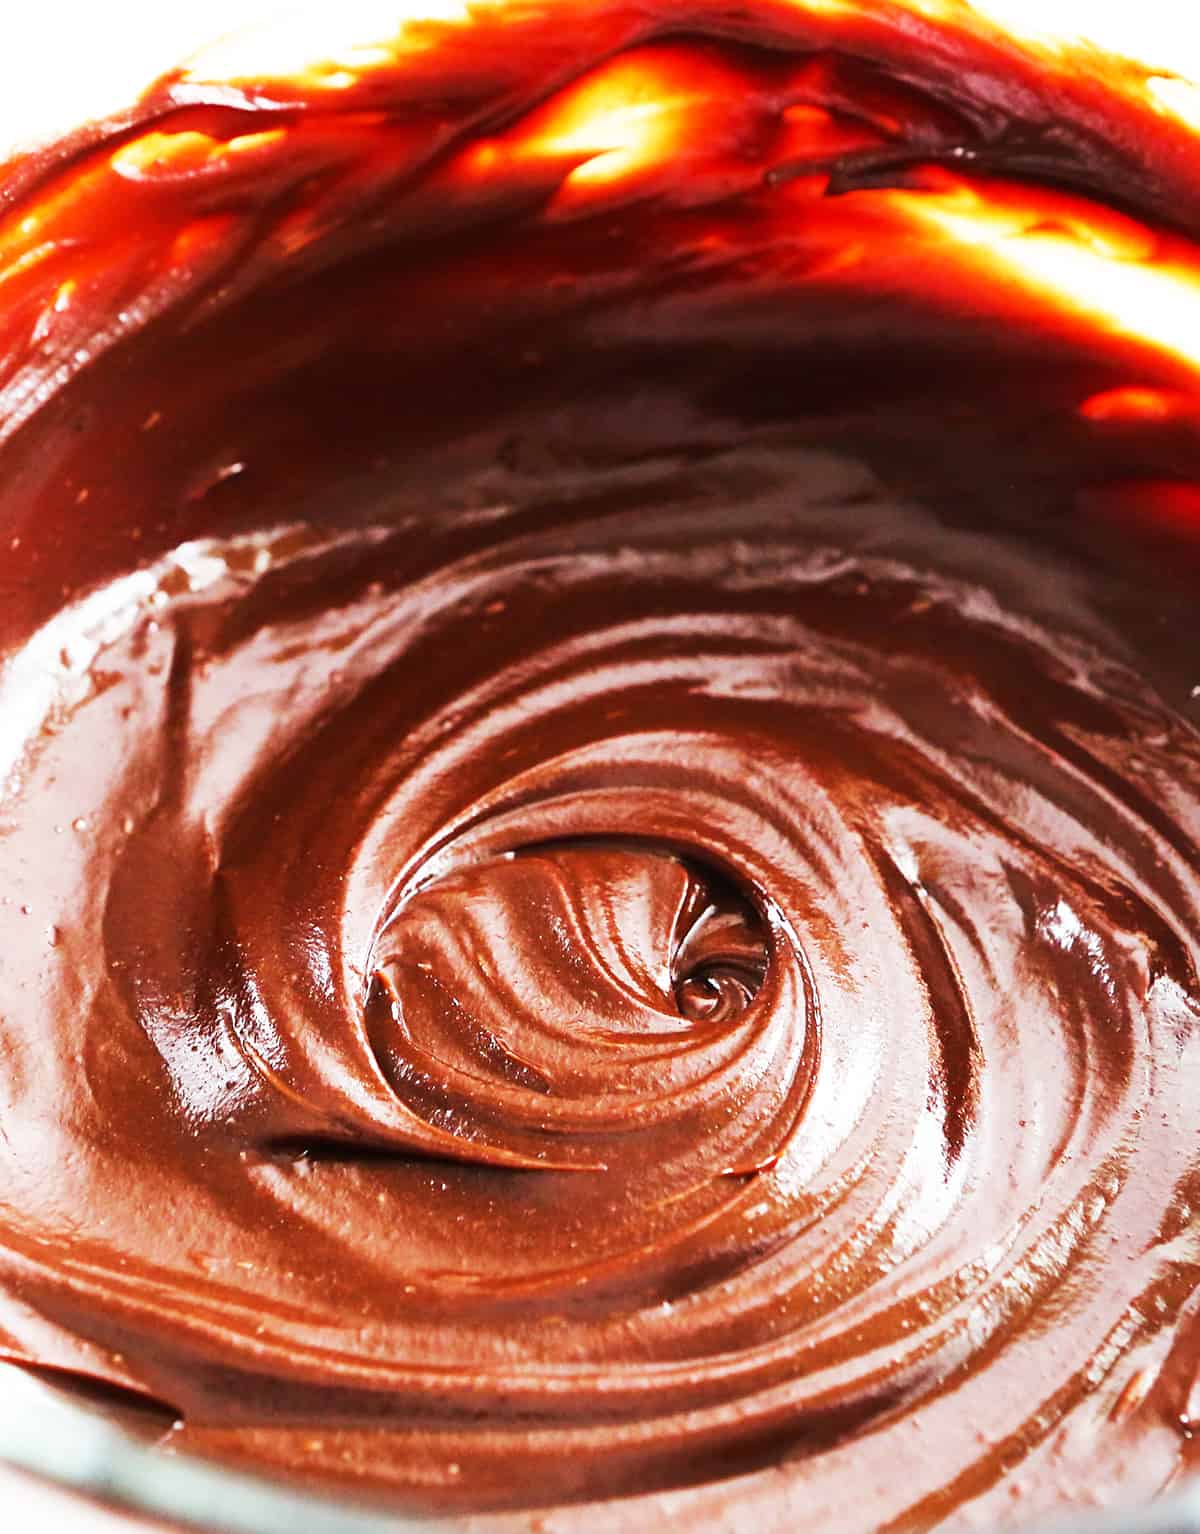 Whirlpool of dreamy, creamy chocolate ganache frosting swirled in a mixing bowl